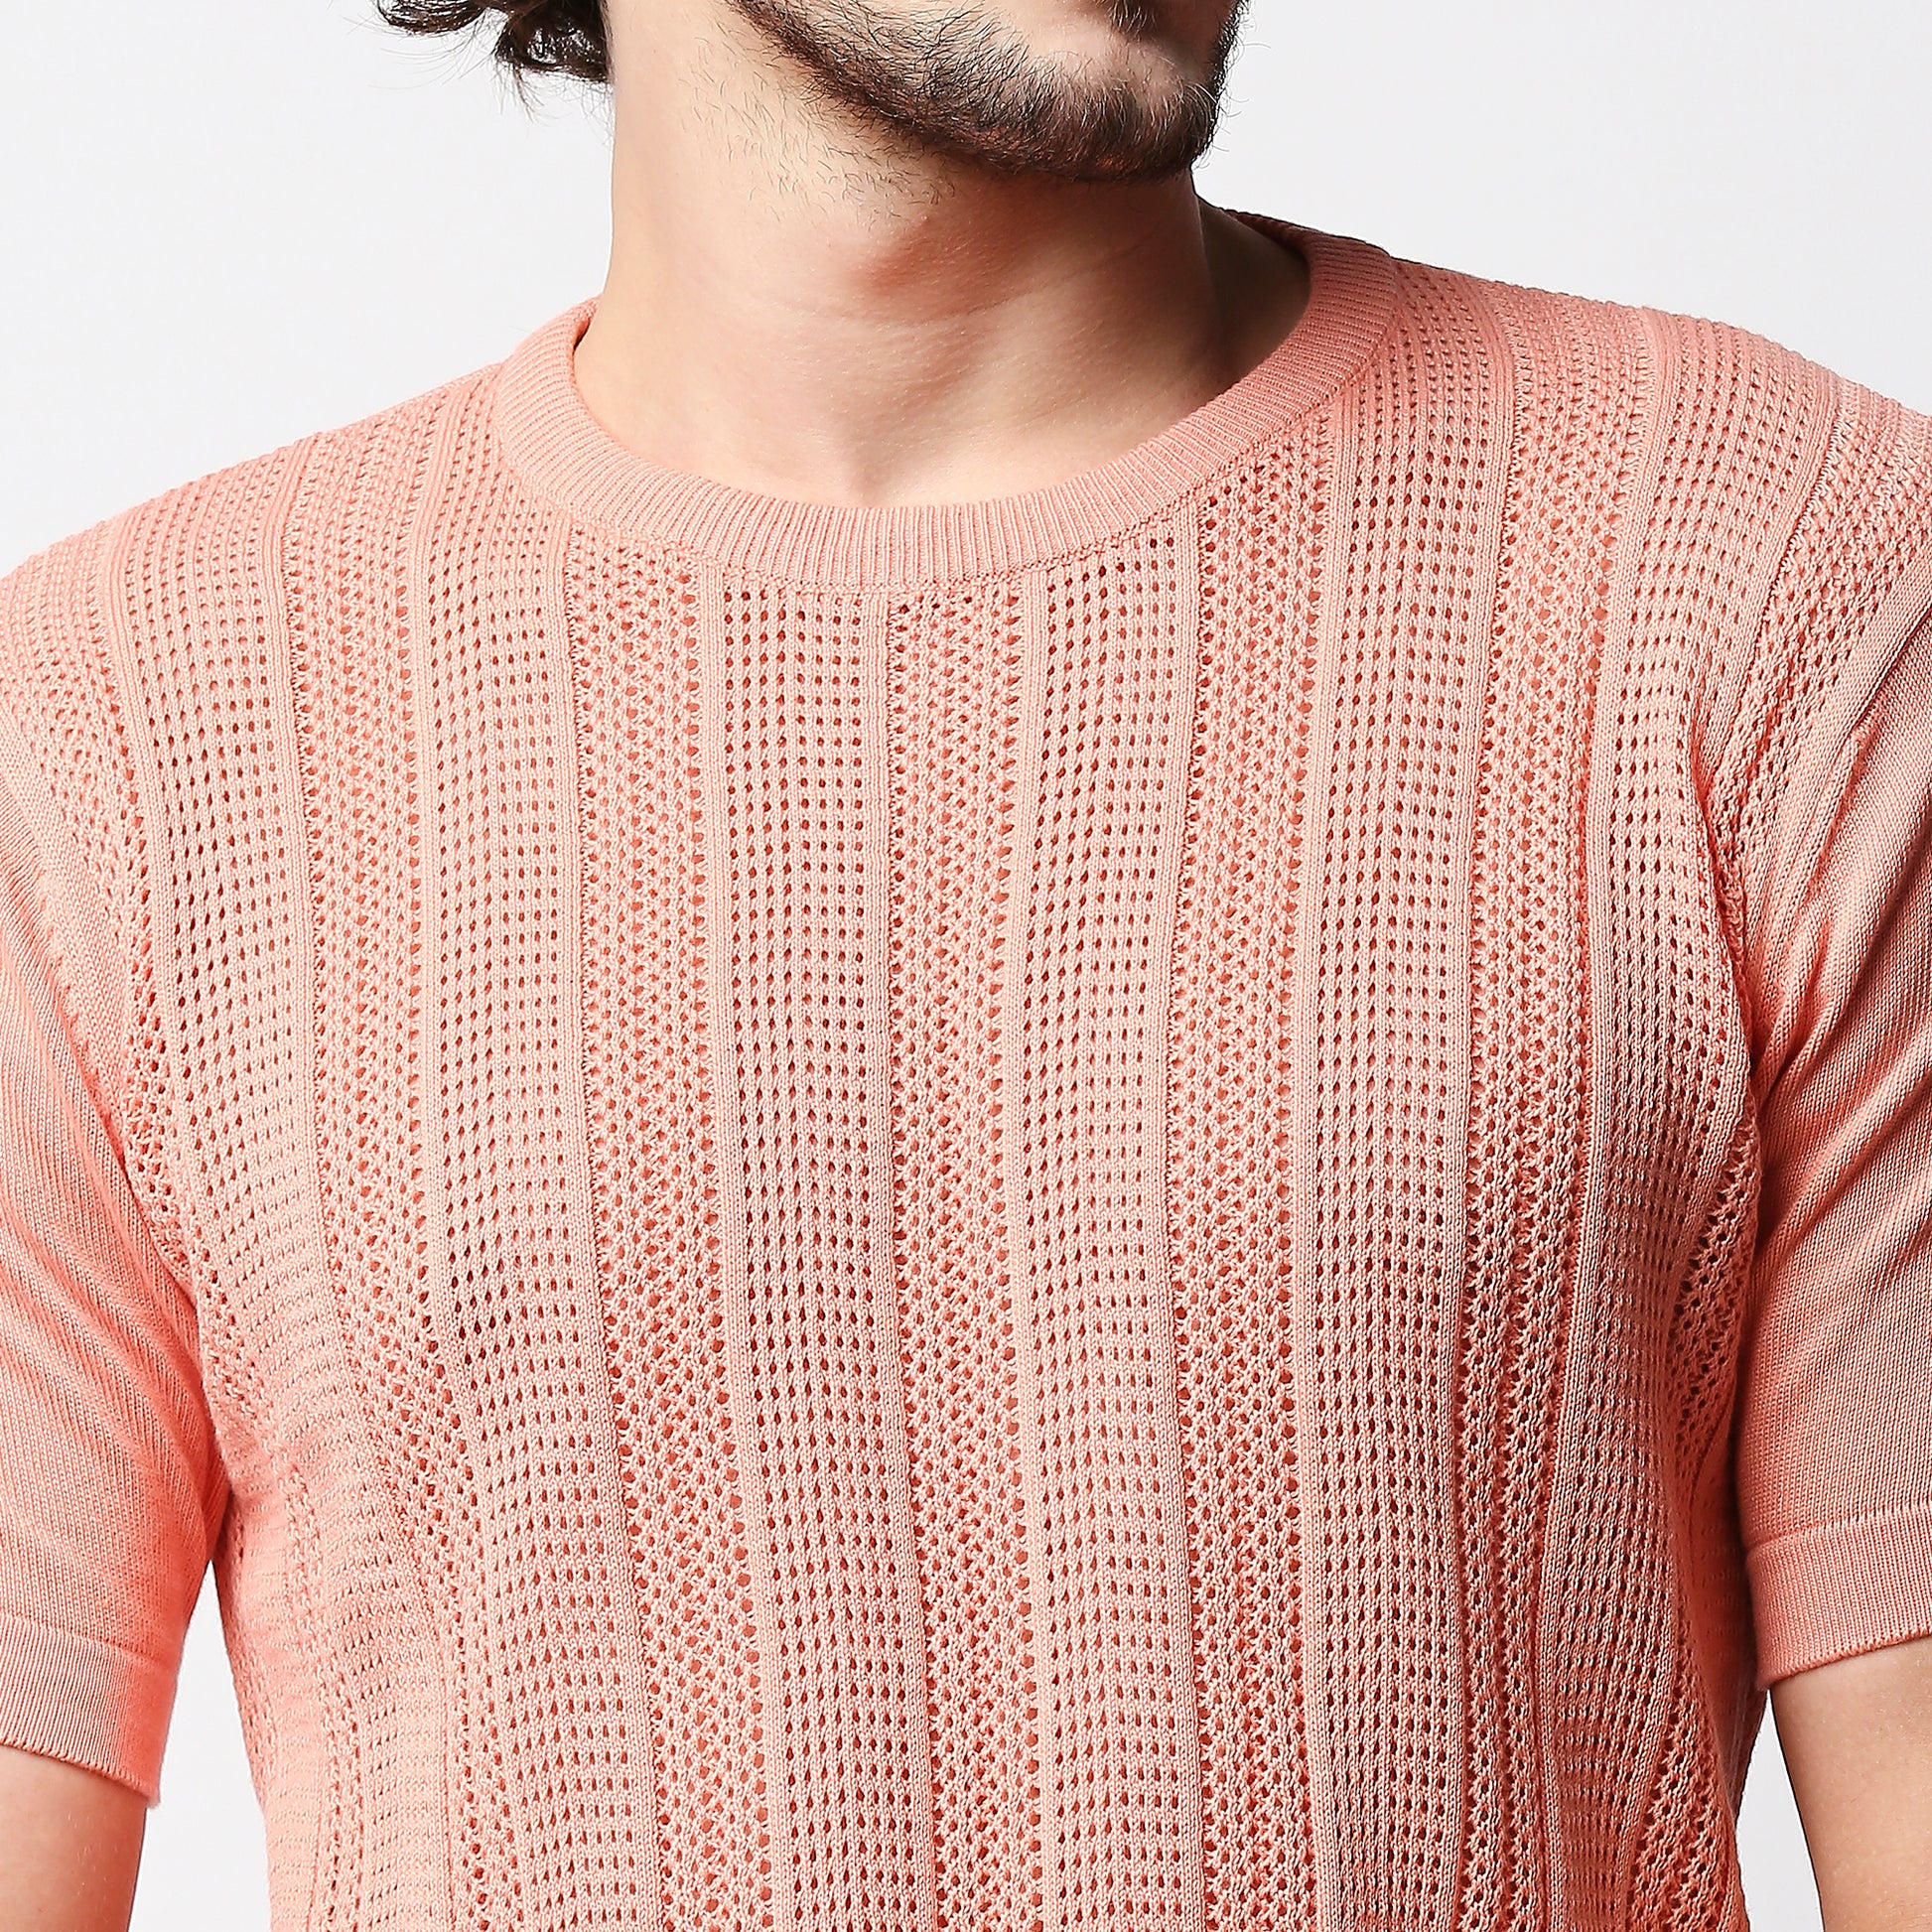 Fostino Peach Pink Knitted Crew Neck T-shirt with structure - Fostino - T-Shirts